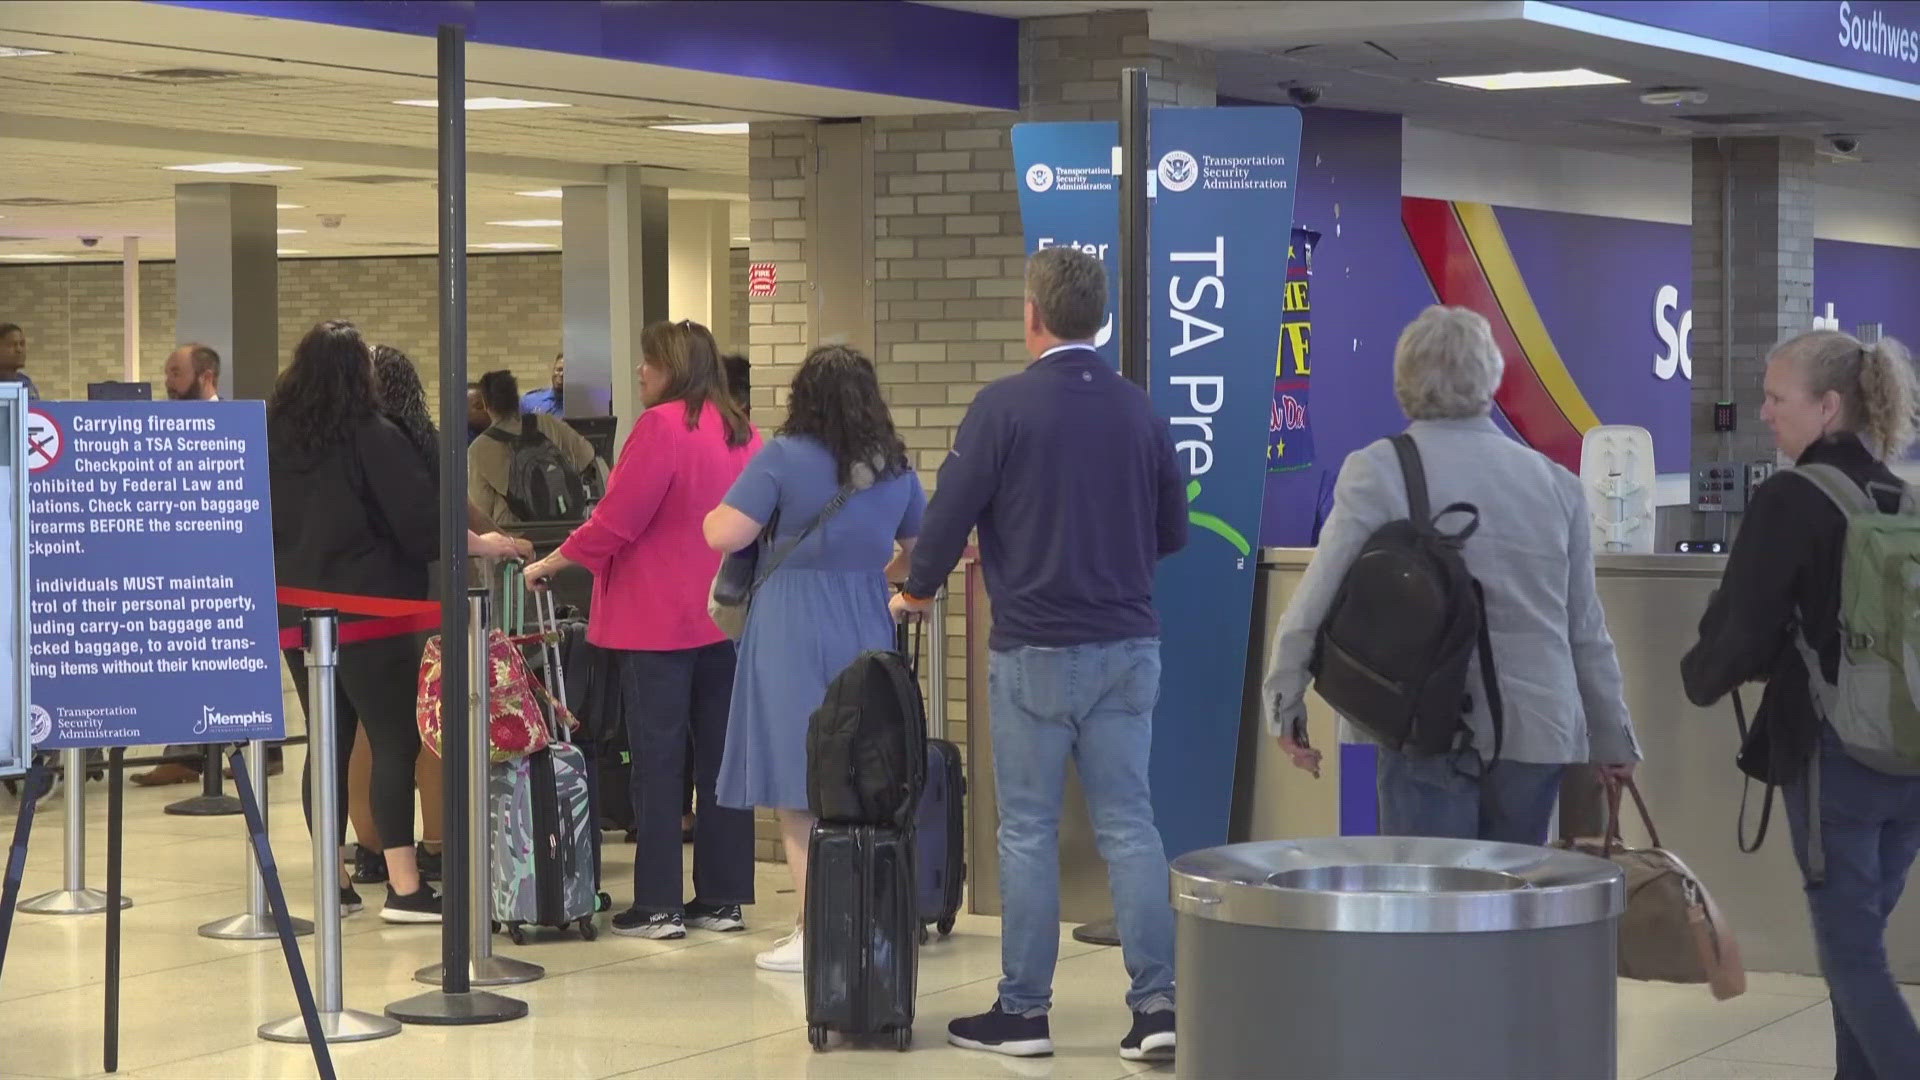 More than 101,000 people are expected to pass through the checkpoint at Memphis International Airport during July 4th weekend, according to the airport.